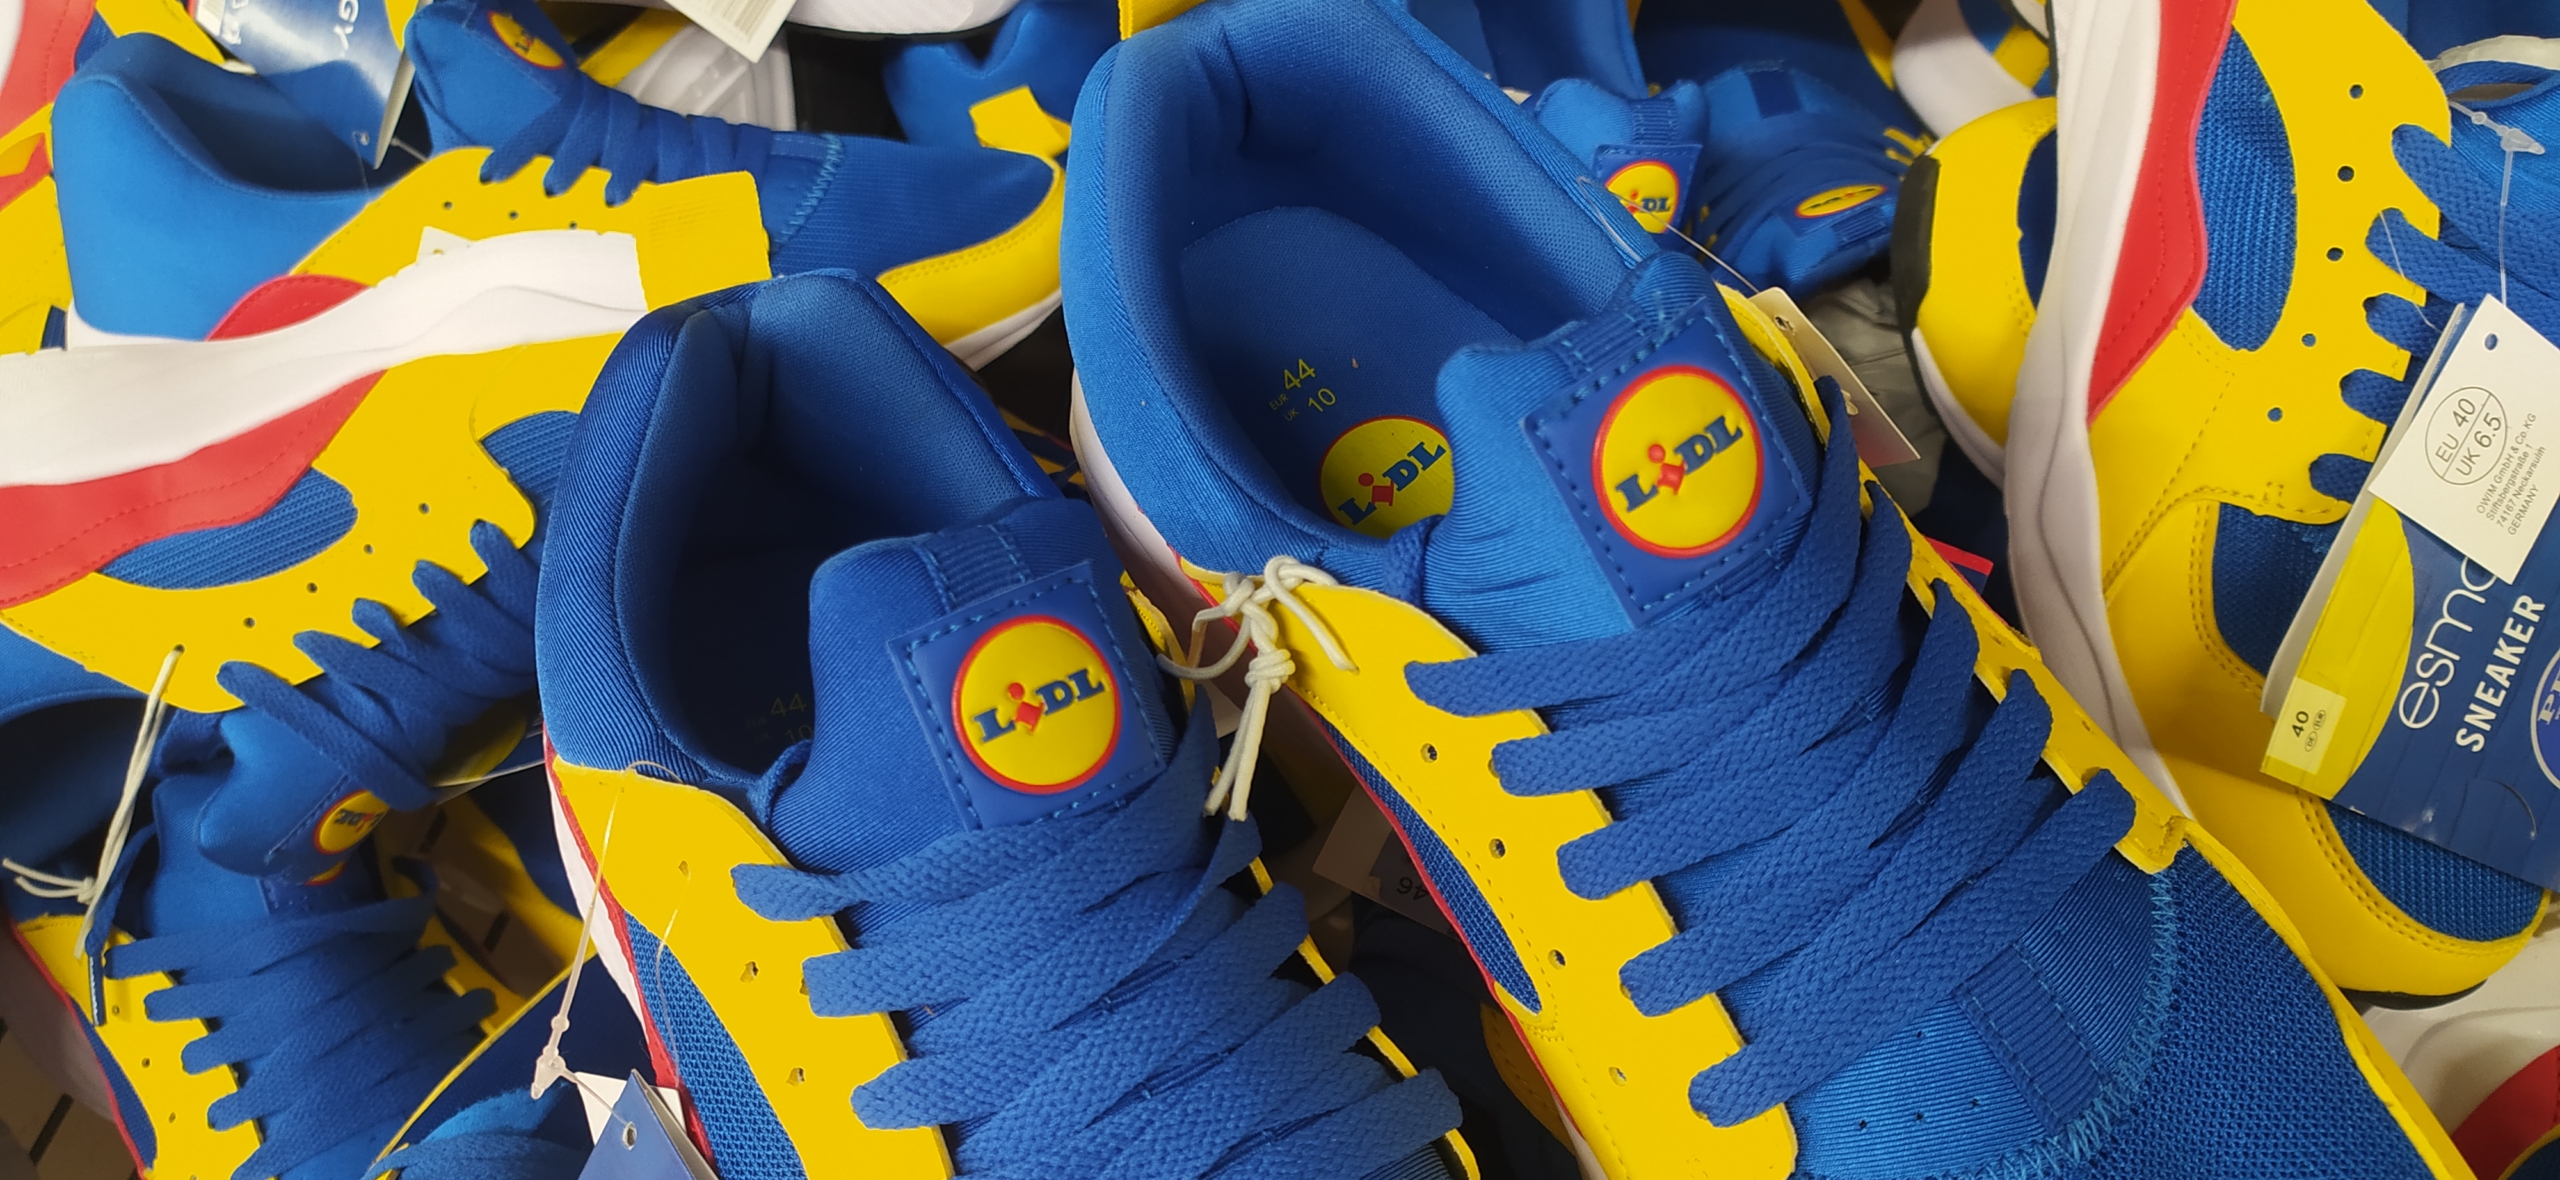 LIDL sneakers LIMITED EDITION 2021 UK 6.5 EU 40